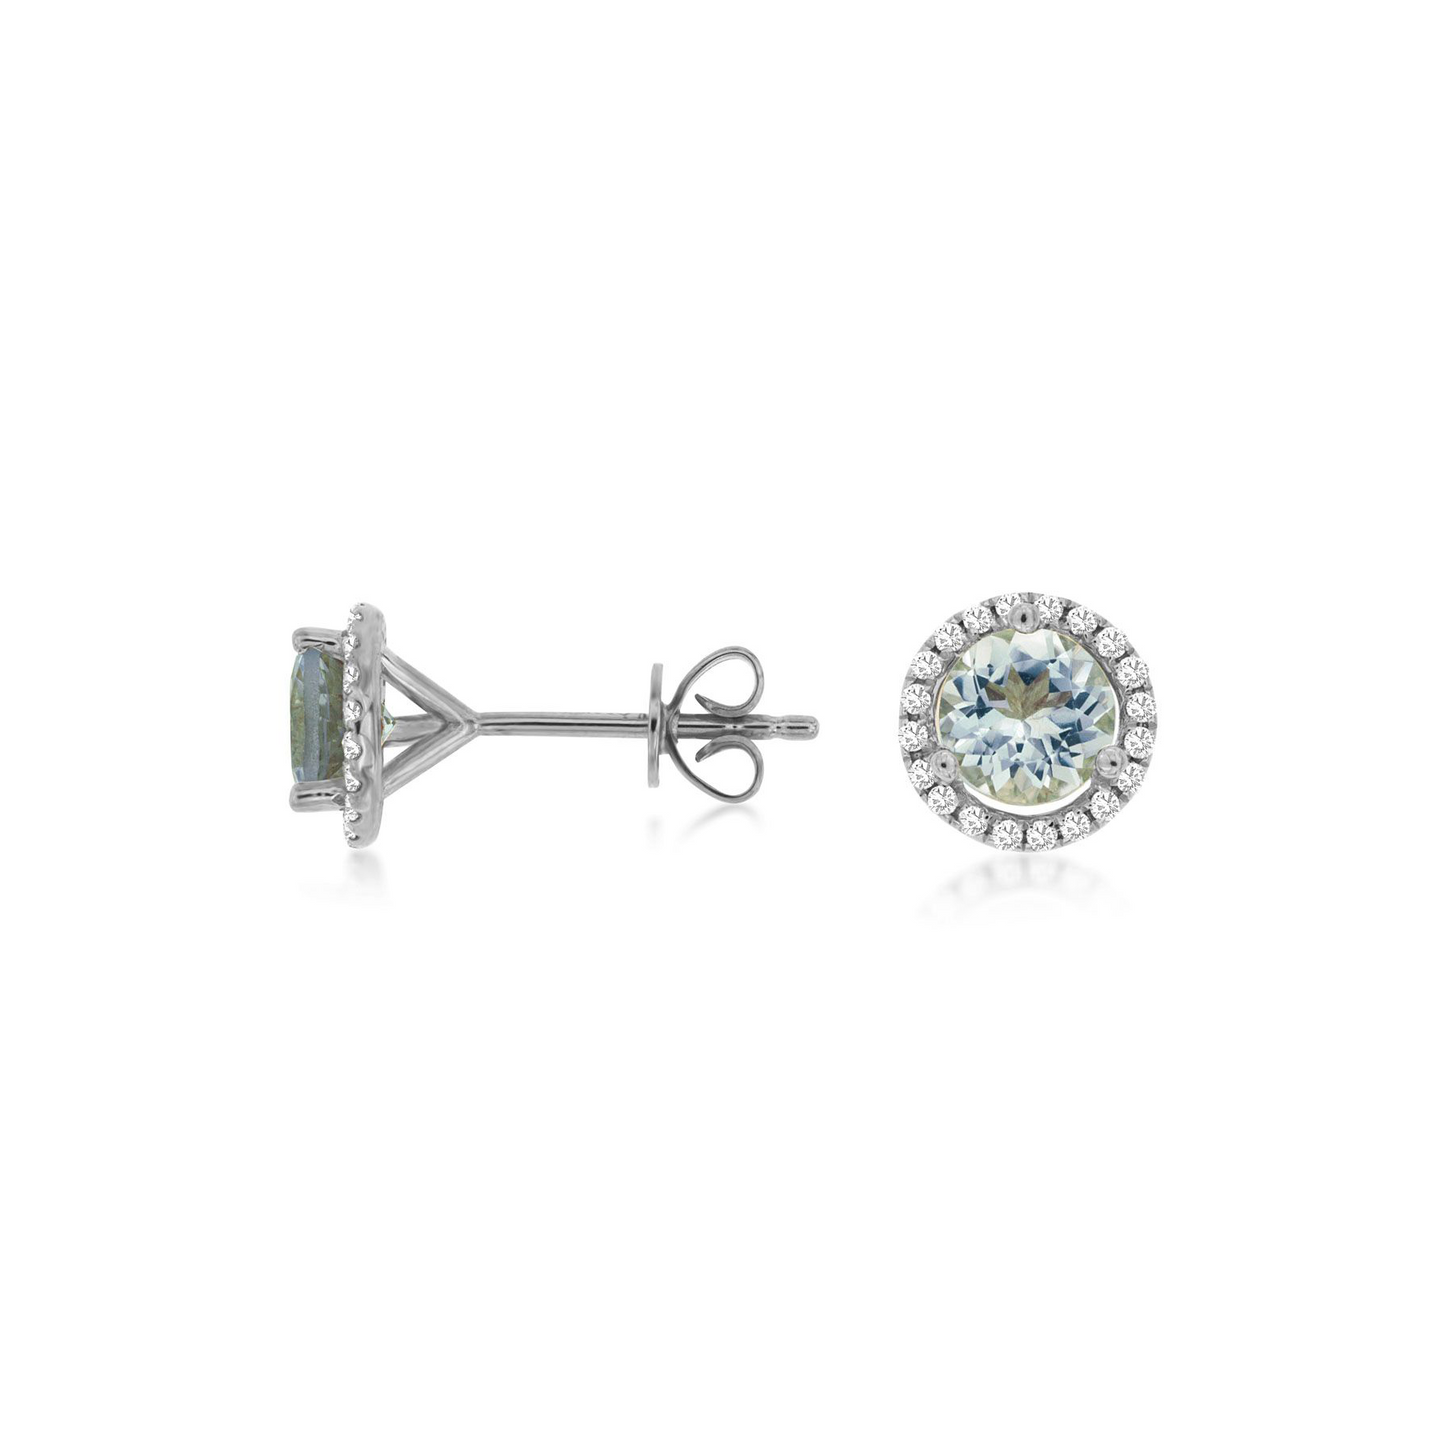 Sabel Collection 14K White Gold Round Aquamarine and Diamond Halo Earrings